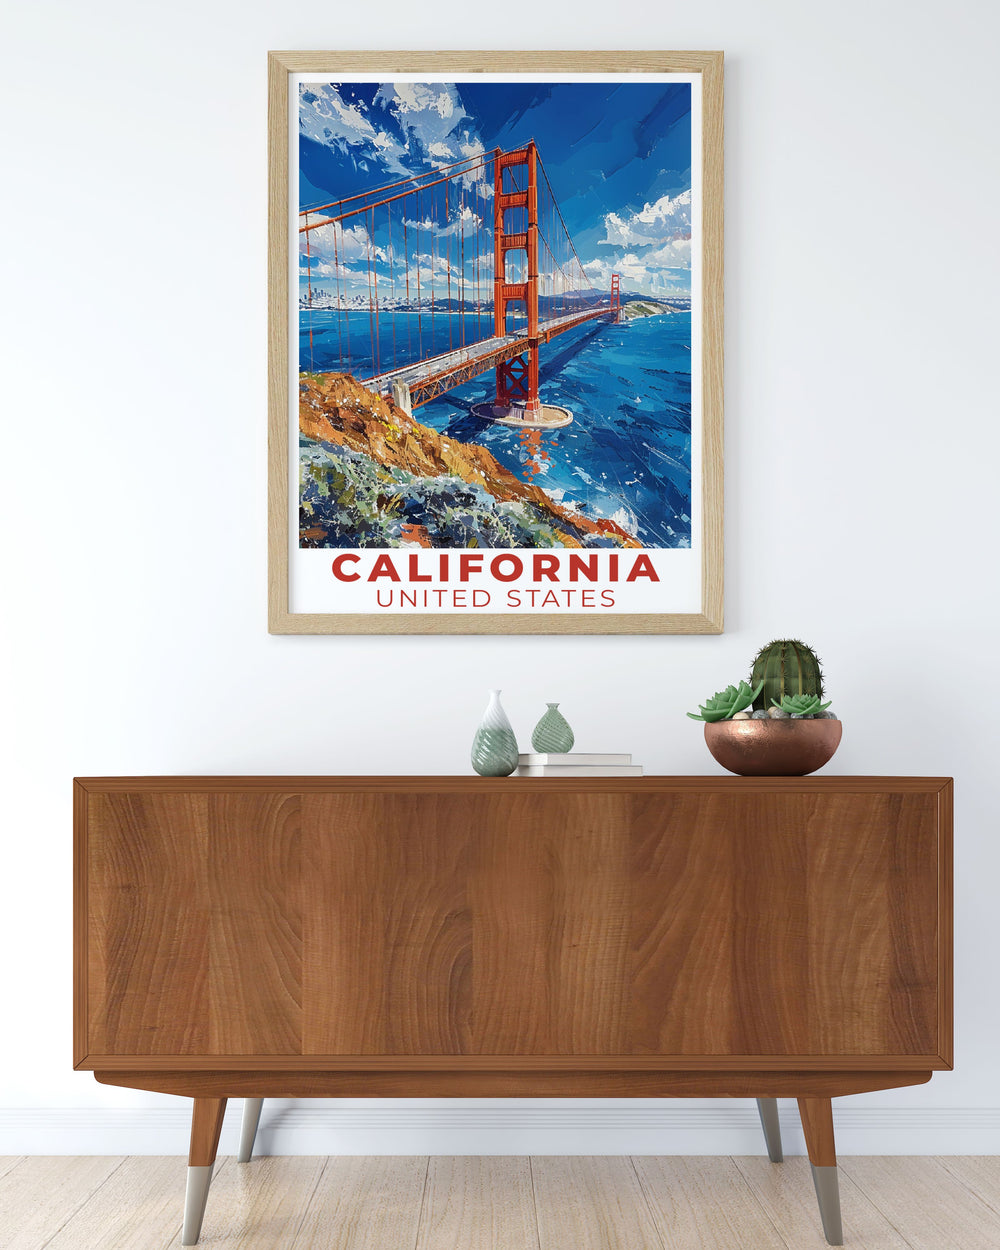 Vintage Golden Gate Bridge artwork capturing the beauty of the iconic California landmark in vibrant colors perfect for enhancing any rooms decor and inspiring a sense of adventure ideal for gifts and travel themed home decoration